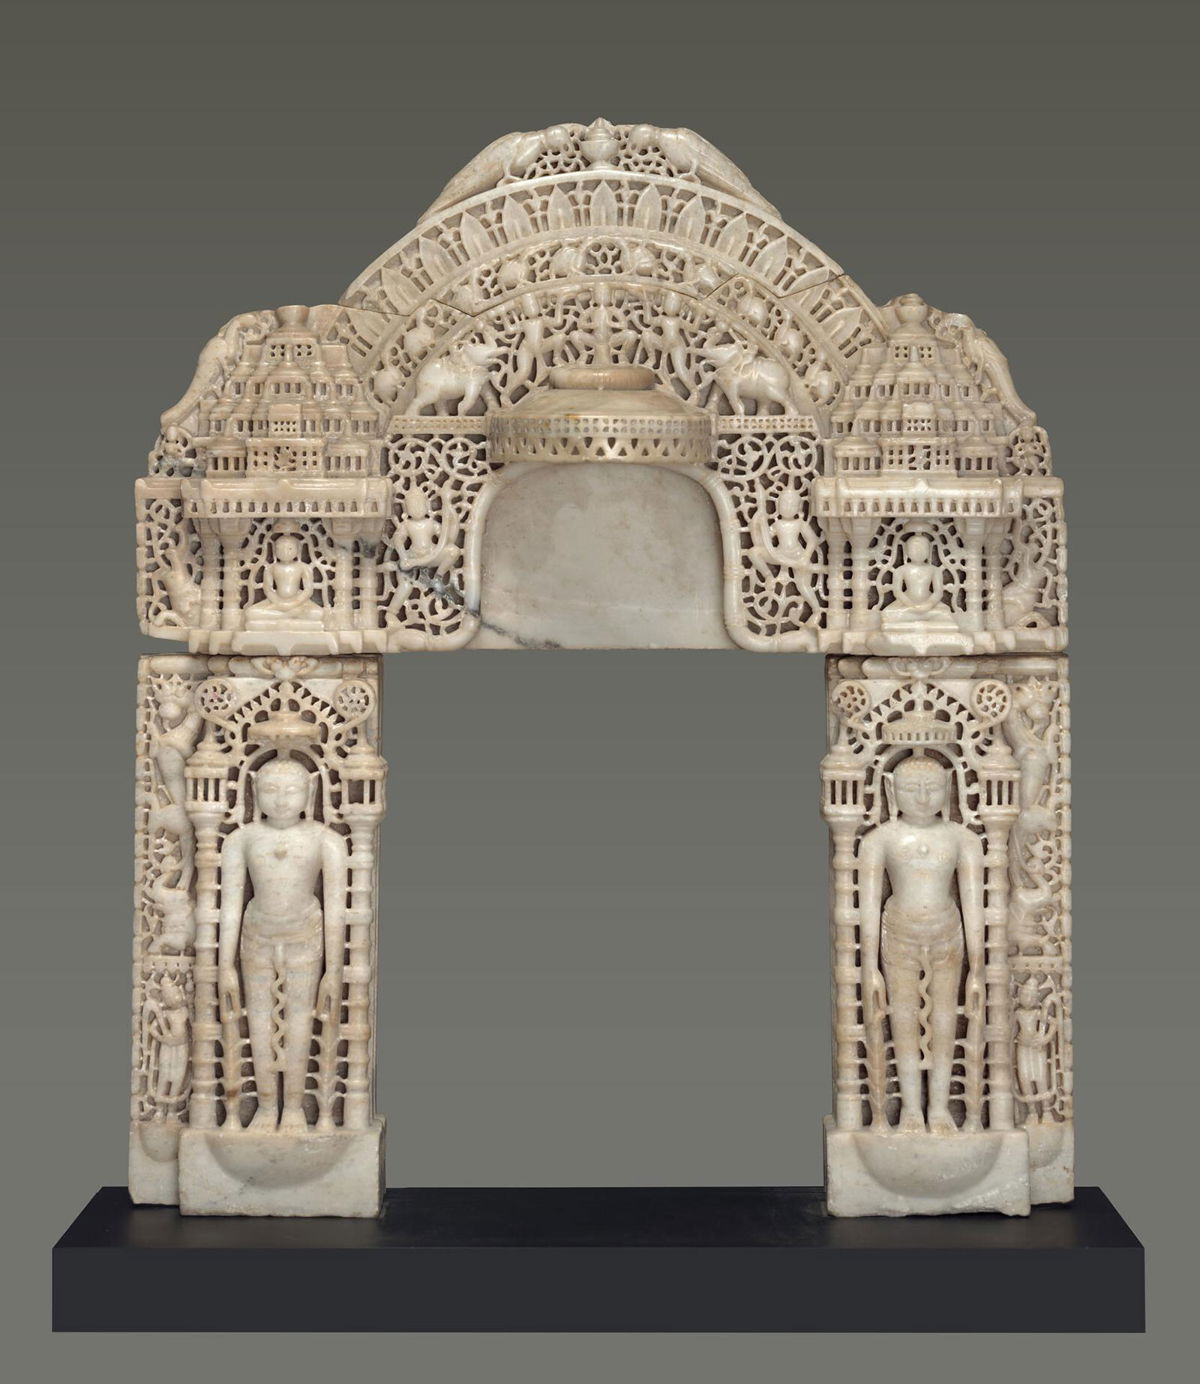 <i>Yale University Art Gallery</i><br/>An image provided by the Manhattan District Attorney's office shows an elaborately carved marble archway